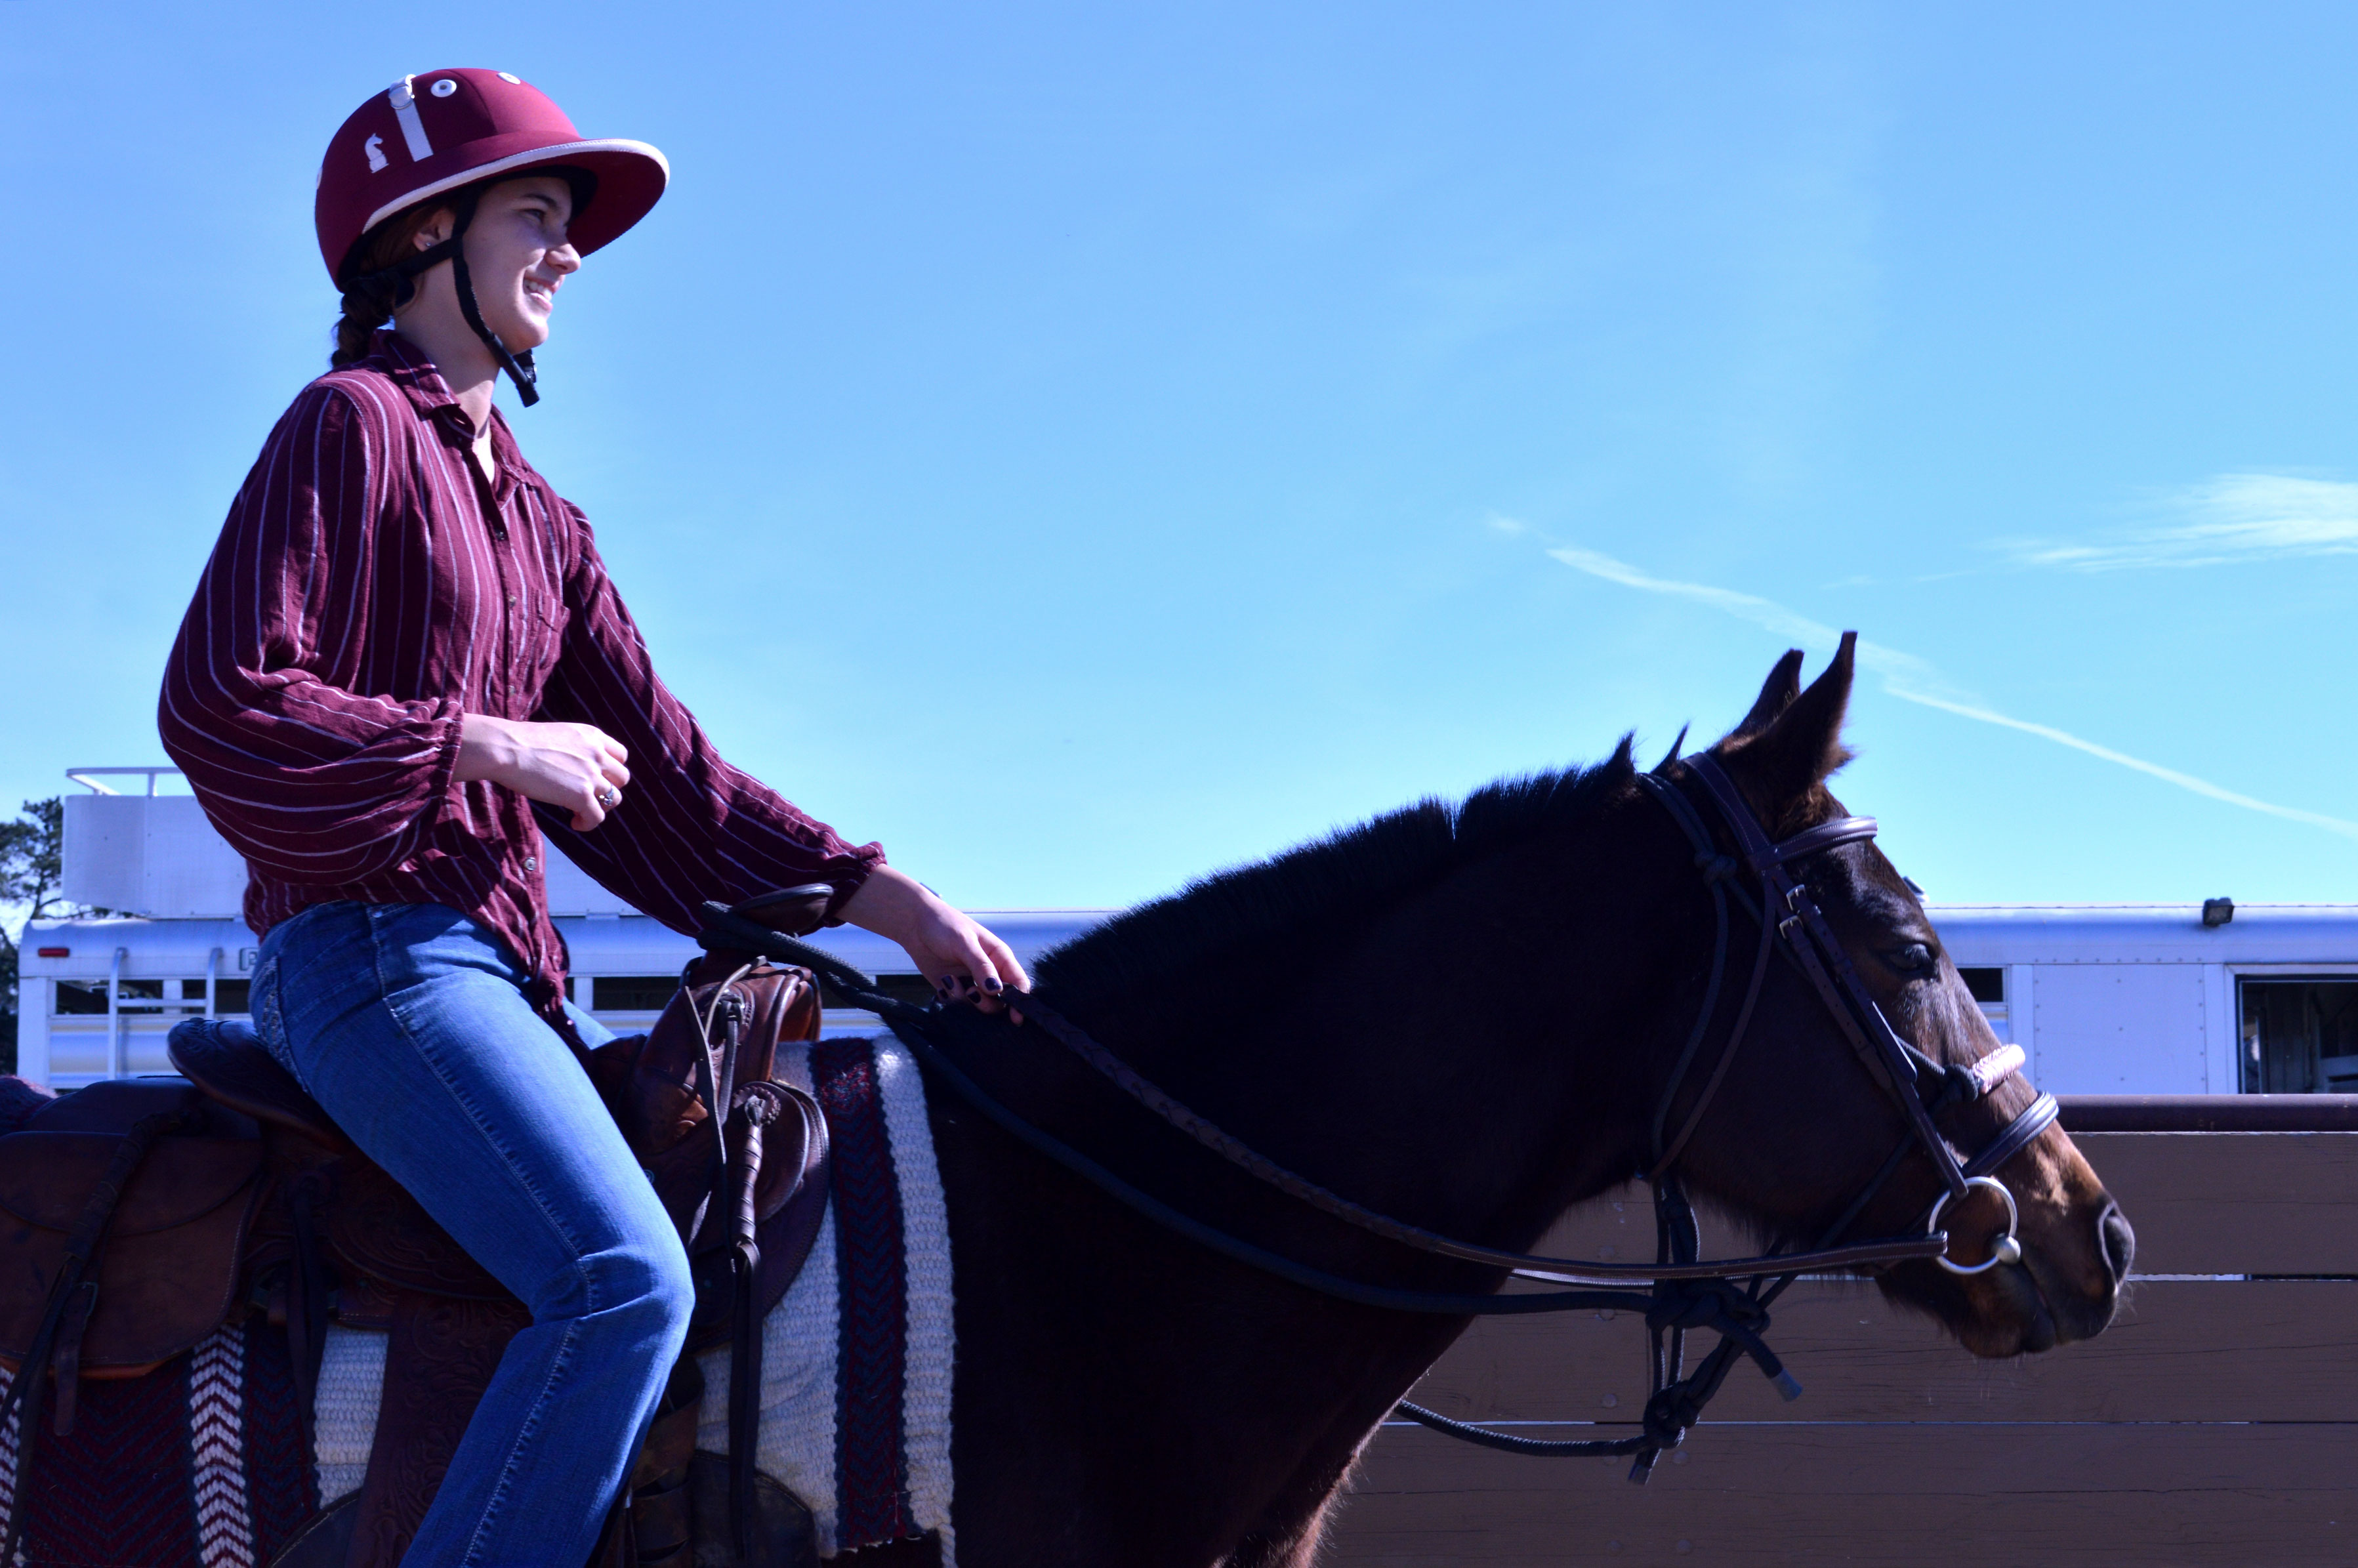 Brownridge says she has had to work hard to get to her position, and will need to work more in the future to prove herself in her field, “Typically upper level horseback riding is a man’s world, and so is Polo. You have to prove yourself as a horseman and prove your worth before anyone is going to respect you, and you have do do that even more if you are a woman. But it’s all worth it.” Photo: Rachel Marquardt